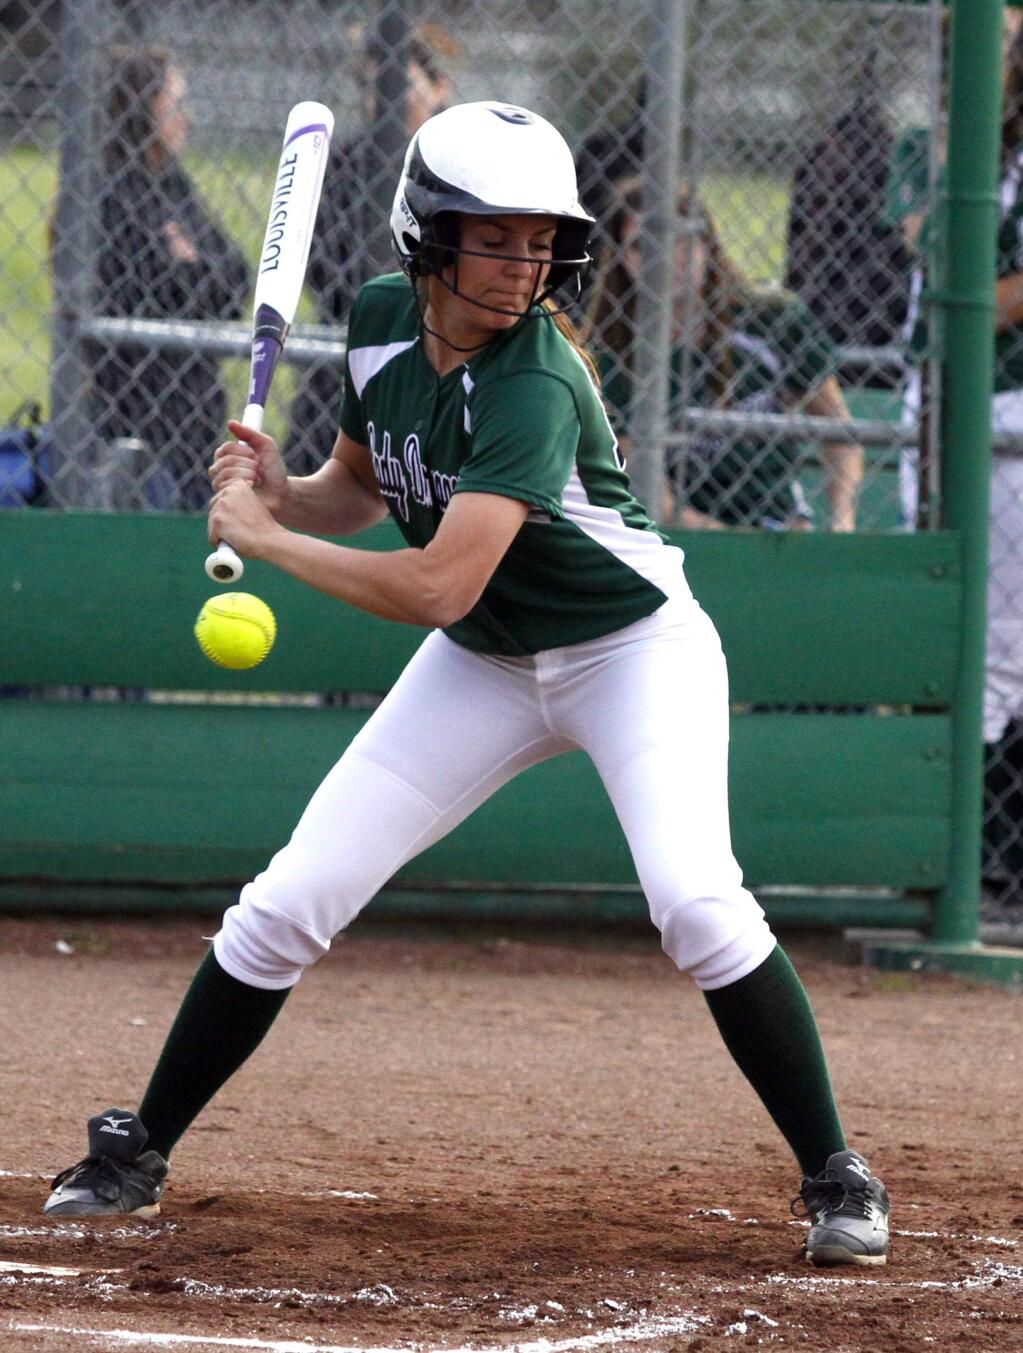 Bill Hoban/Index-TribuneSonoma's Hannah Herrick, seen taking a pitch during a recent game at the high school field, pitched a two-hitter with nine strikeouts, while singling and scoring two runs in the Lady Dragons' win over Clear Lake during the weekend's Ukiah hosted Wildcat Tournament.